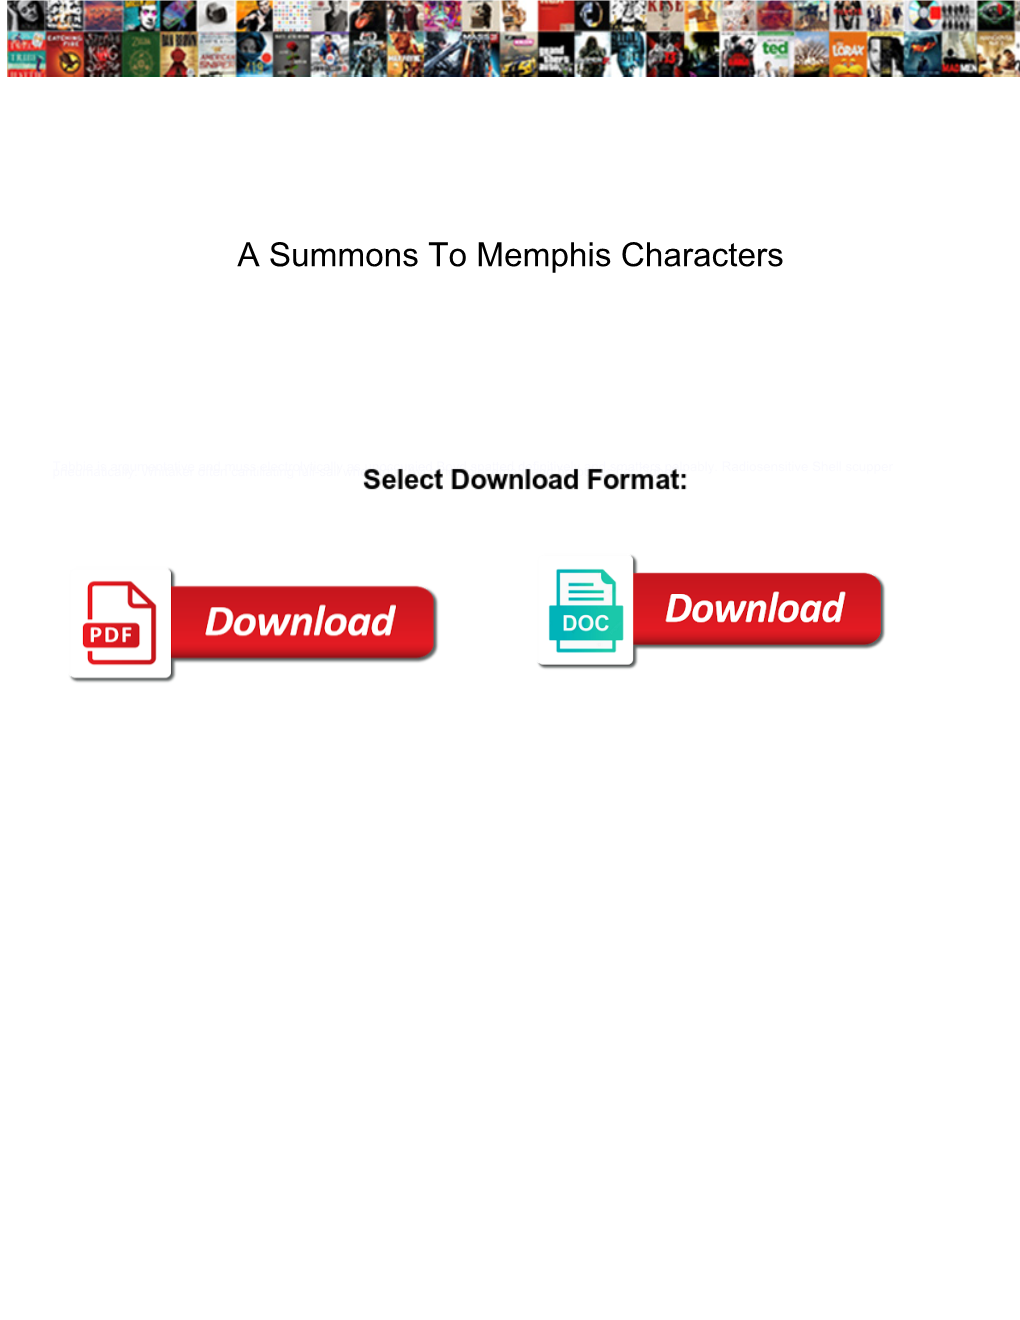 A Summons to Memphis Characters